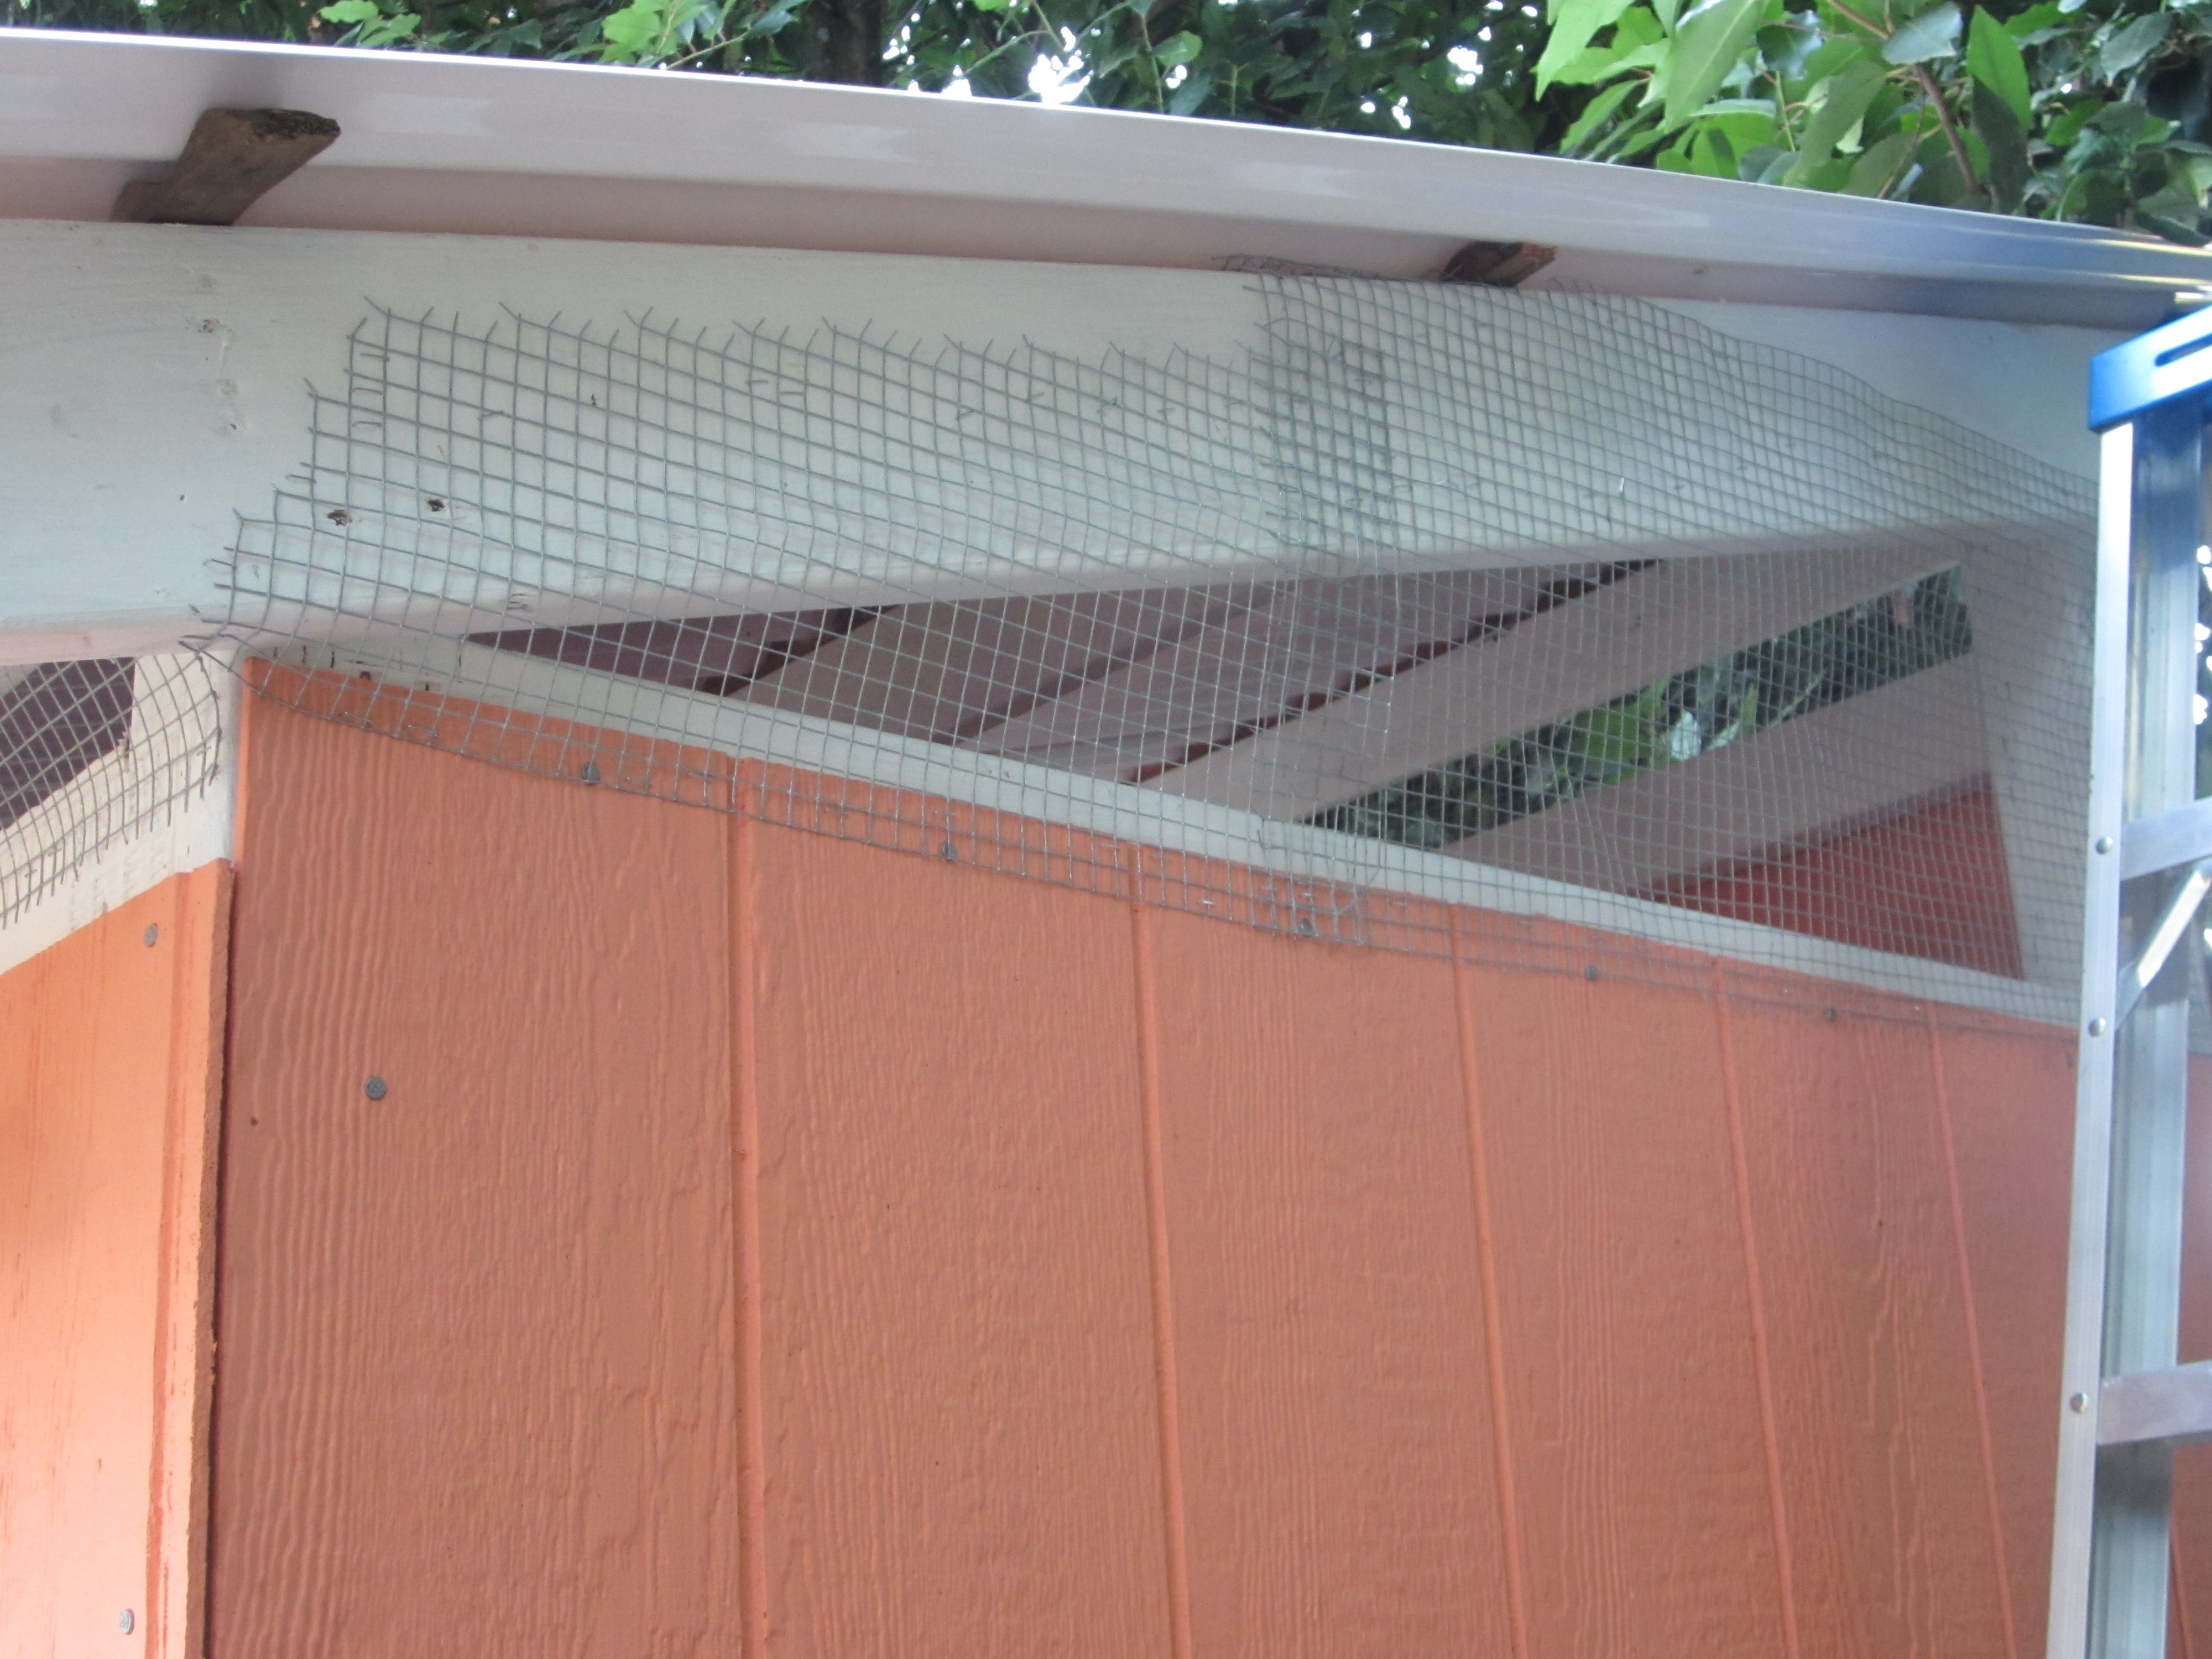 Covering up any holes with the hardware cloth. Plus this acts as a vent for the roost in the summer